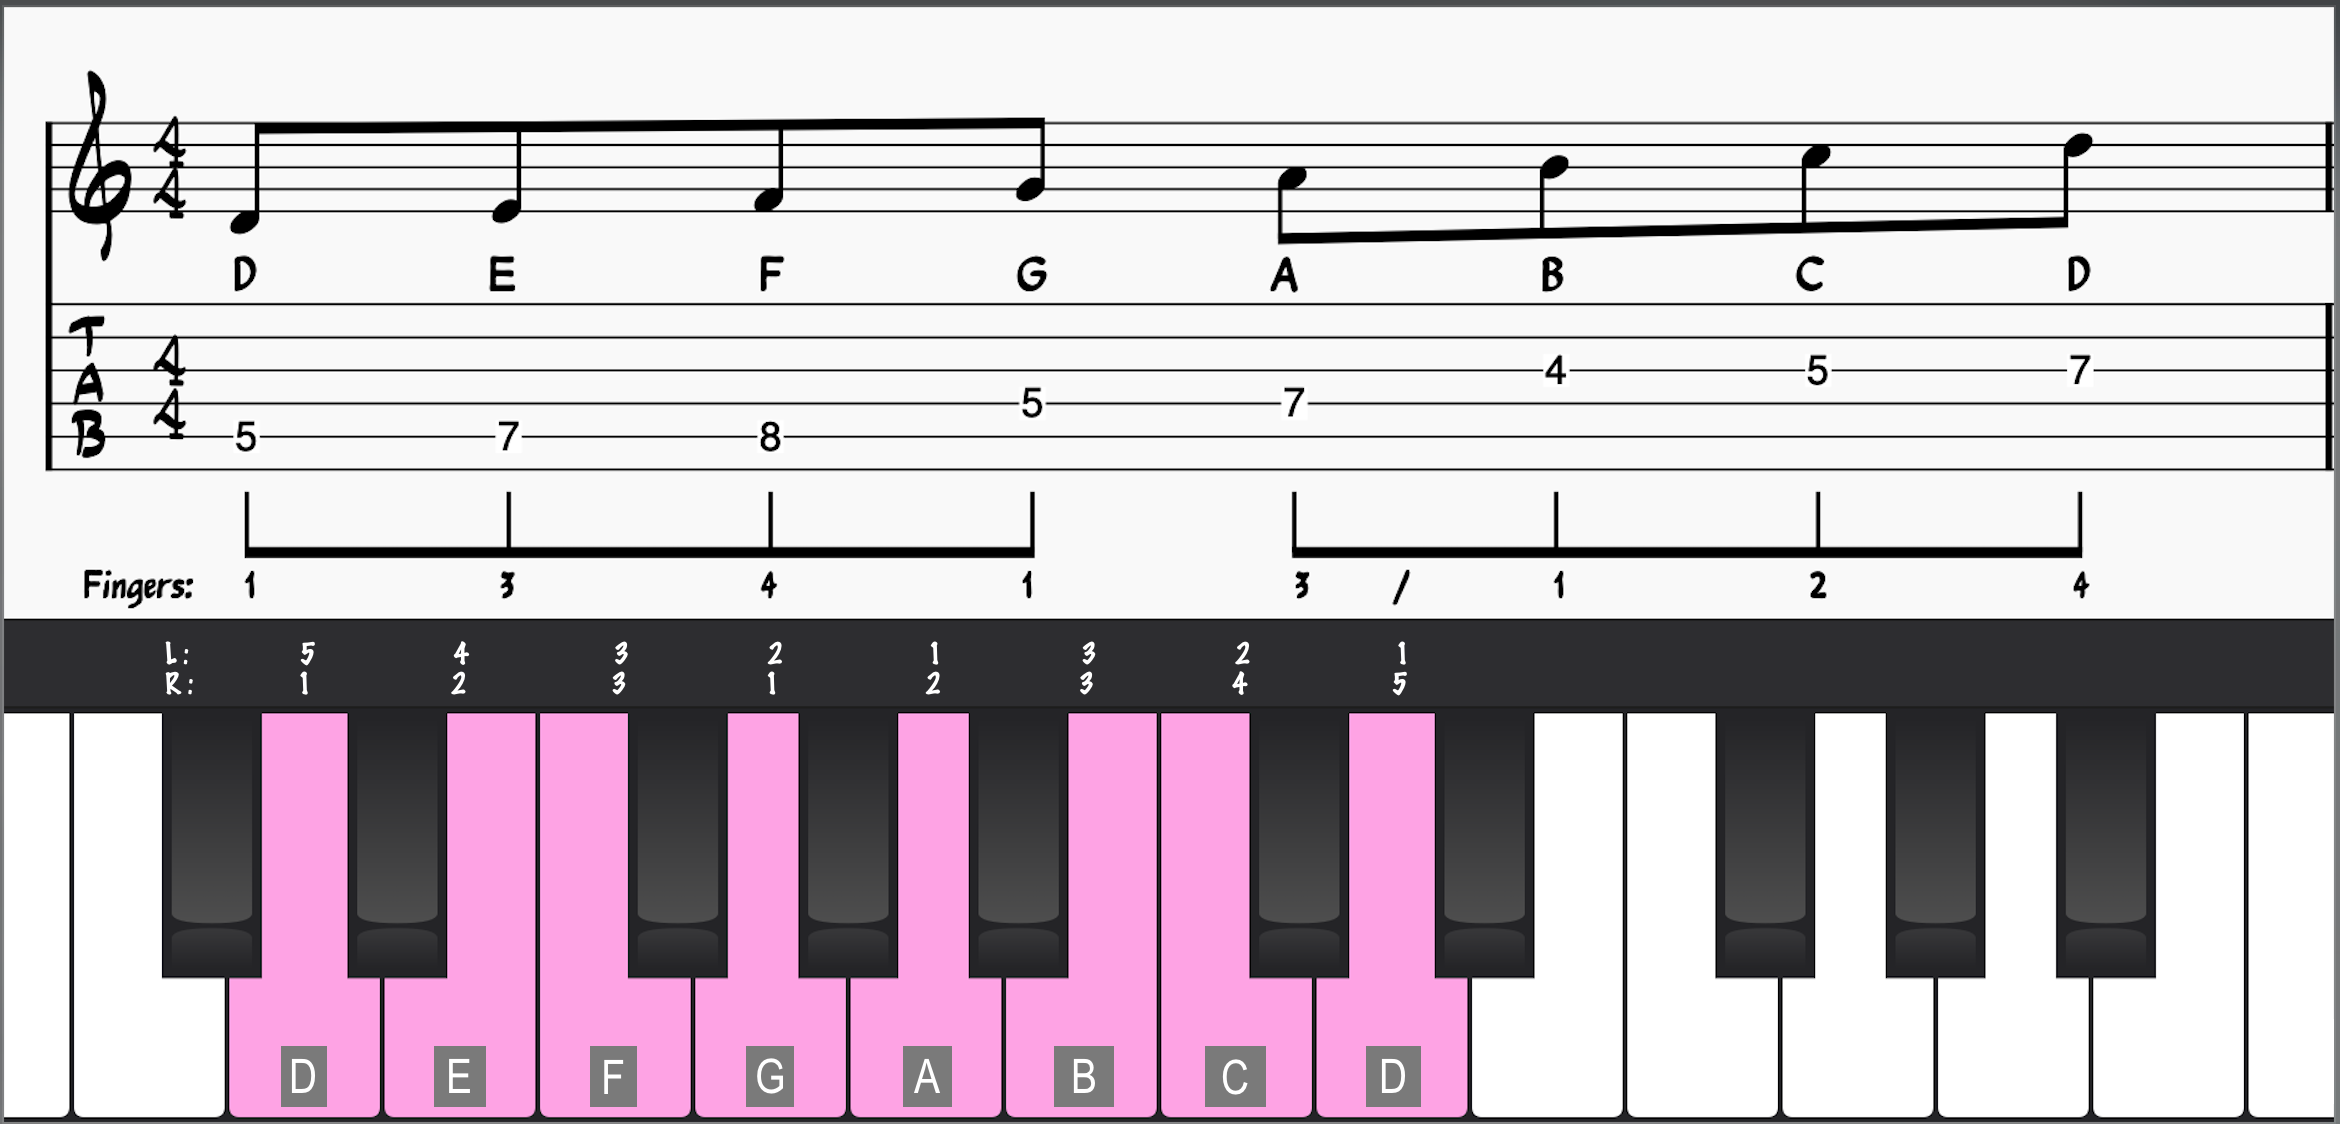 D Dorian Mode with Piano and Guitar Fingerings